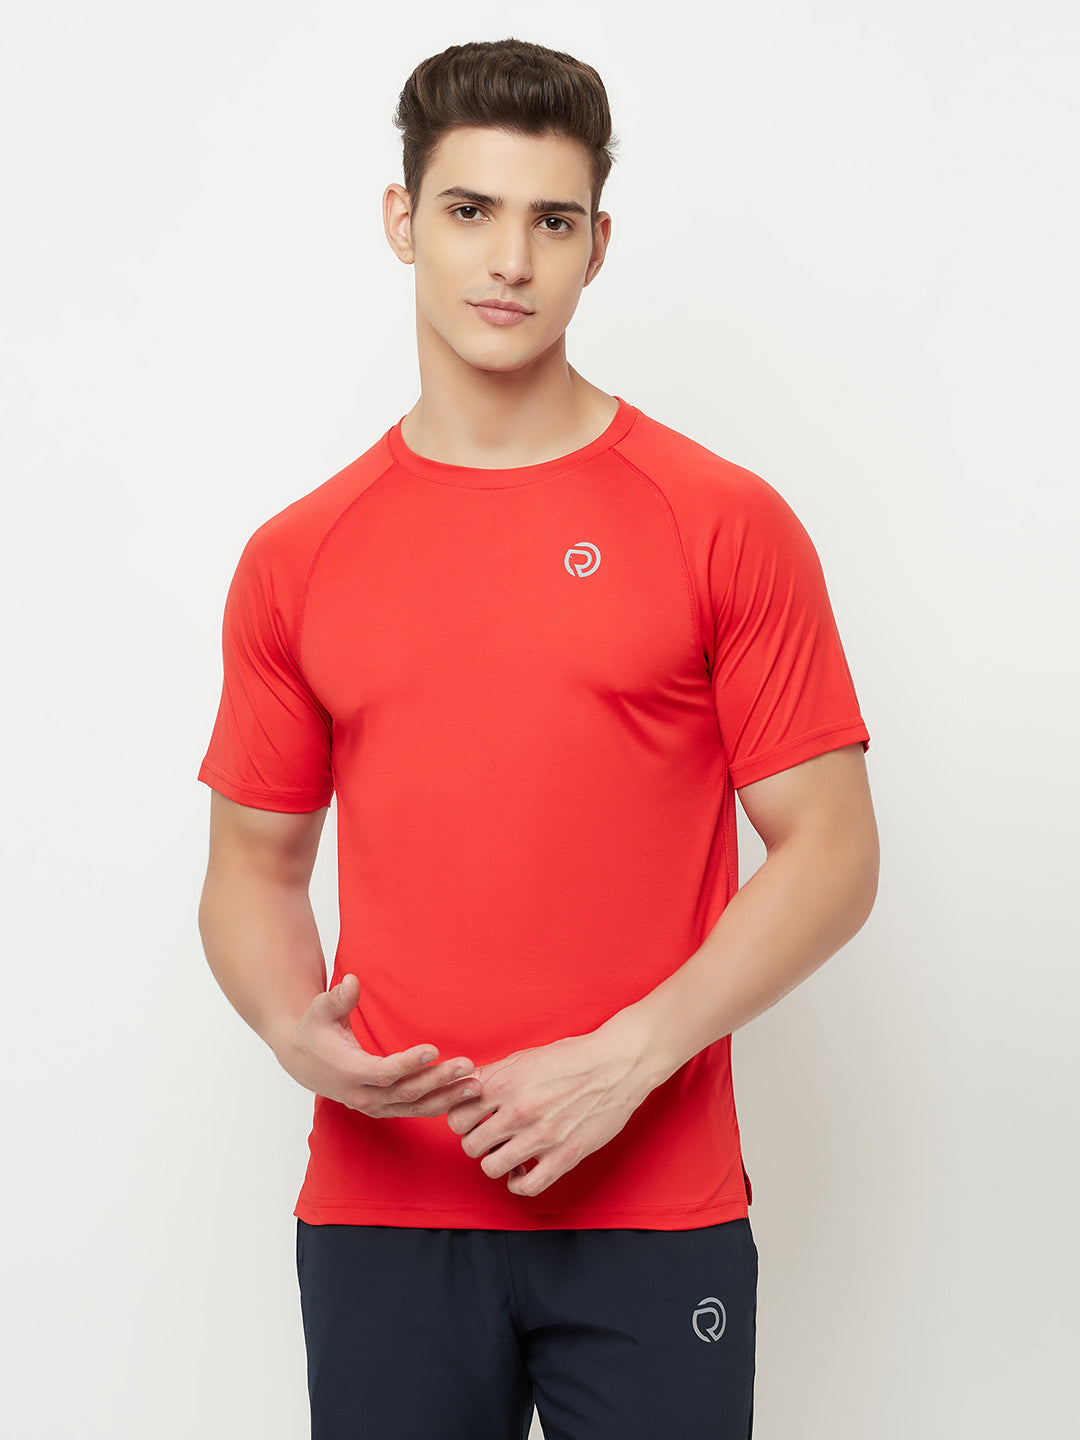 Men's Reflective Dryfit Tshirt with Performance Mesh Back